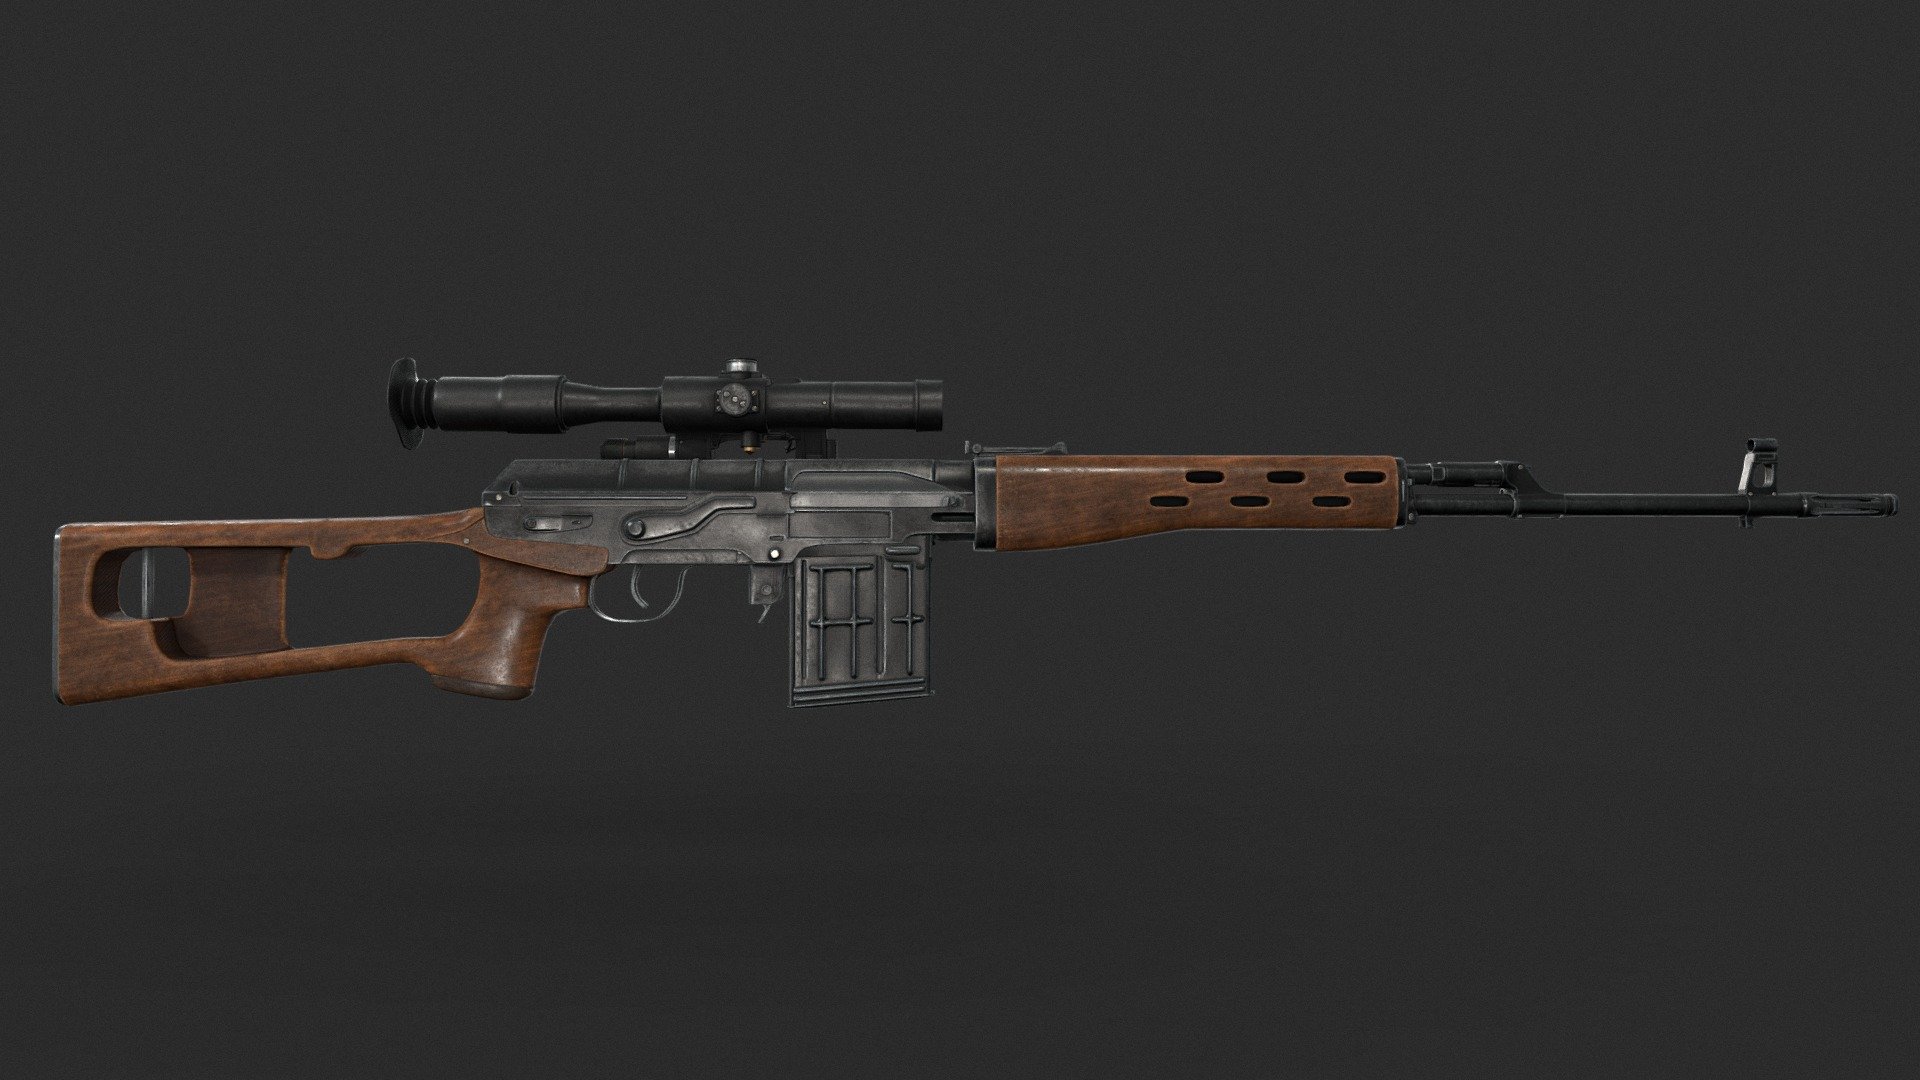 Game ready model of SVD Dragunov. If you find some bugs please comment and i will repair it.
ArtStation: www.artstation.com/artwork/03y1oY - SVD Dragunov - Download Free 3D model by neyr 3d model